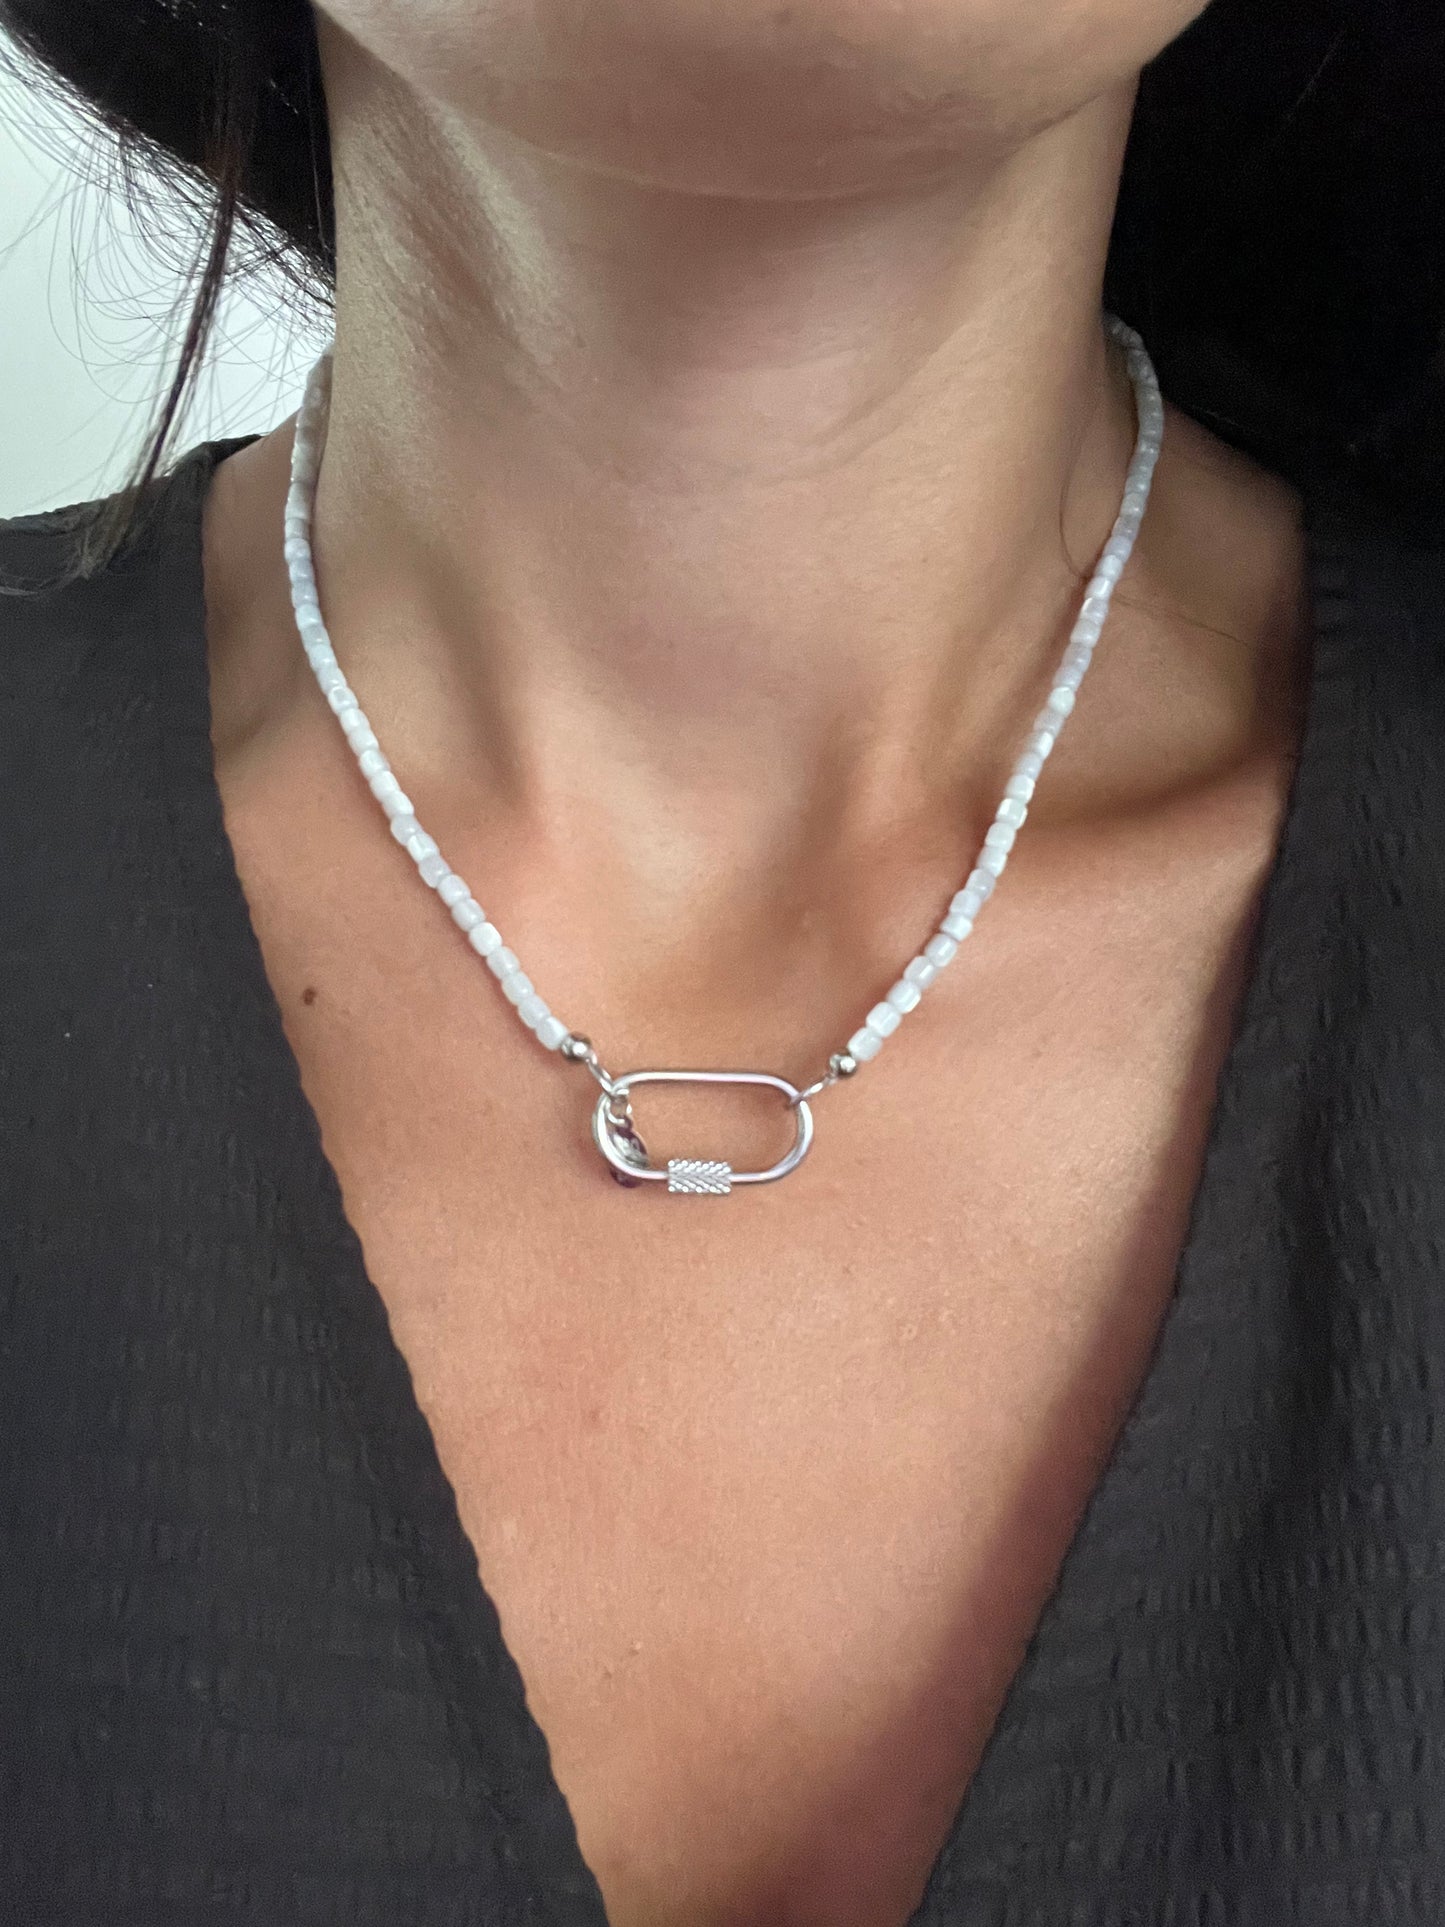 Silver sea shell hook necklace